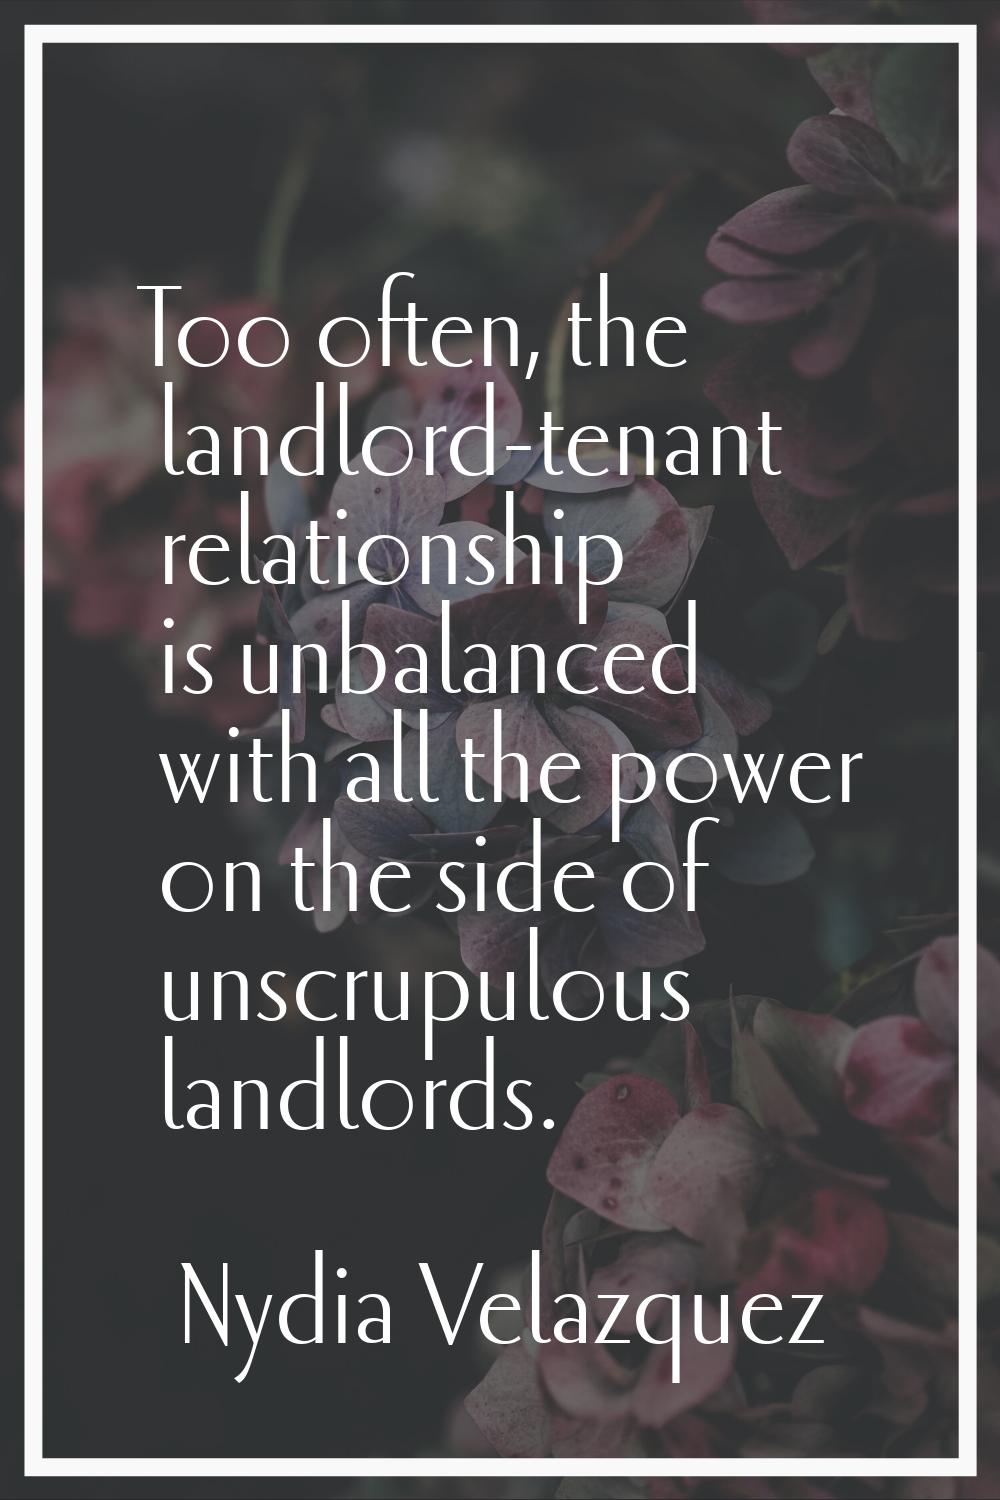 Too often, the landlord-tenant relationship is unbalanced with all the power on the side of unscrup